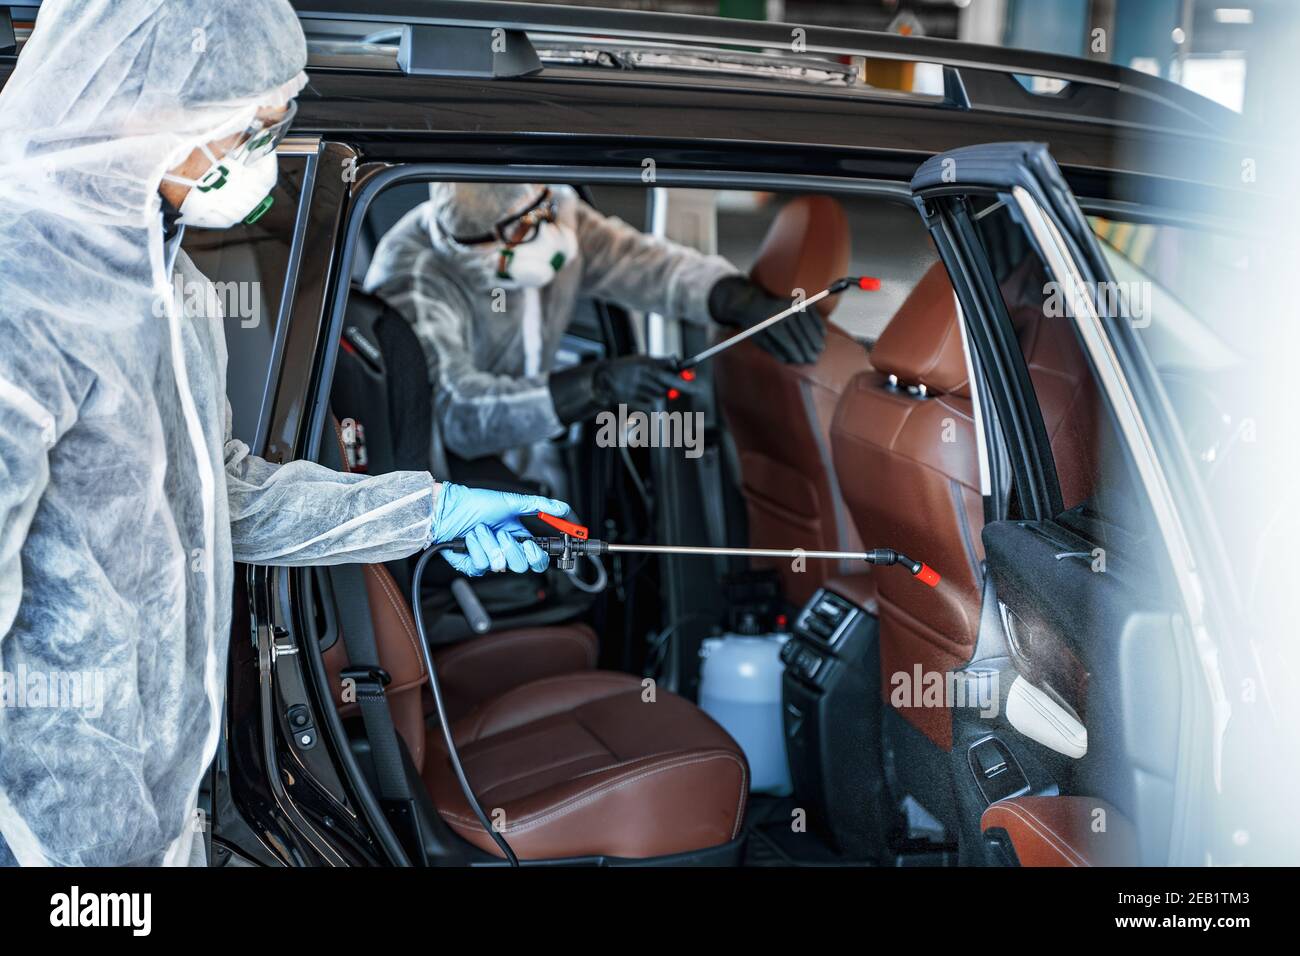 Disinfectant worker in protective masks and suits making disinfection of car seats Stock Photo